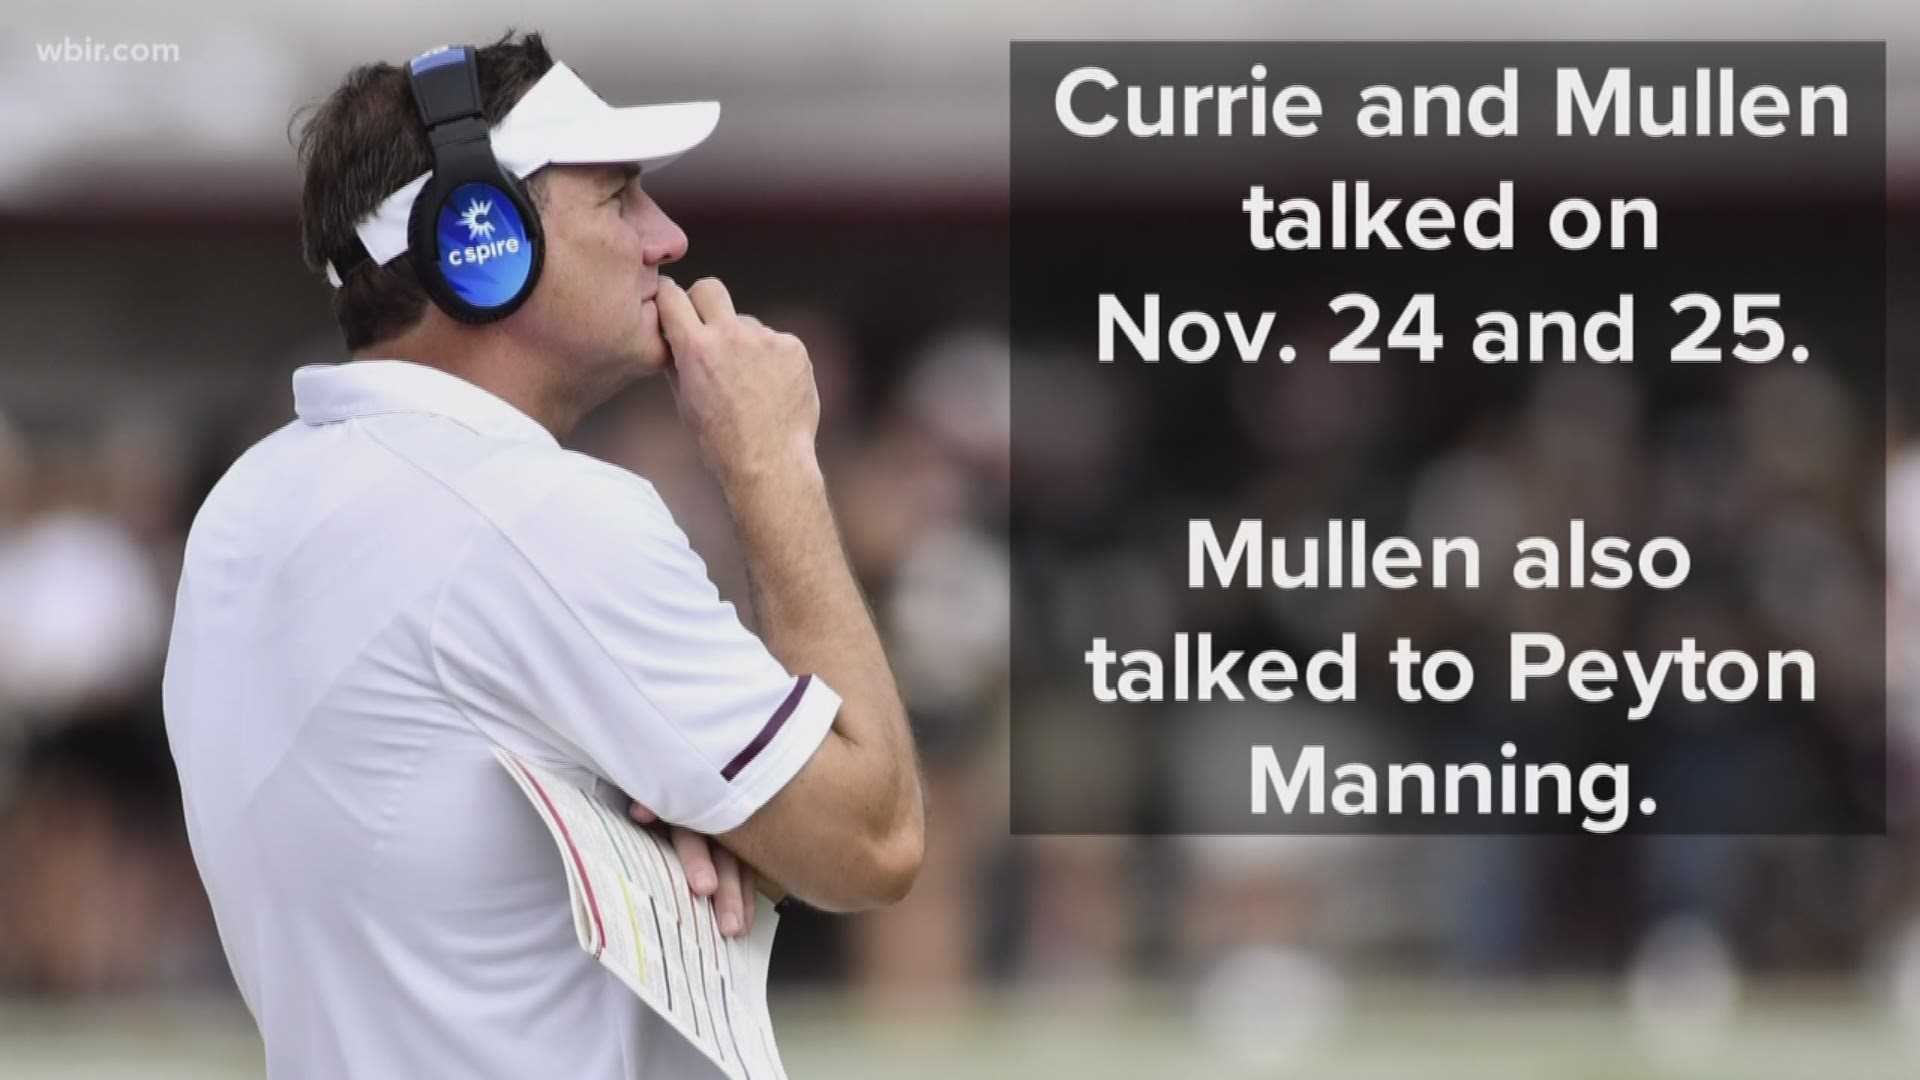 Text messages and emails obtained by WBIR in an open records requests reveal information about the Vols coaching search and John Currie's final days as athletics director.